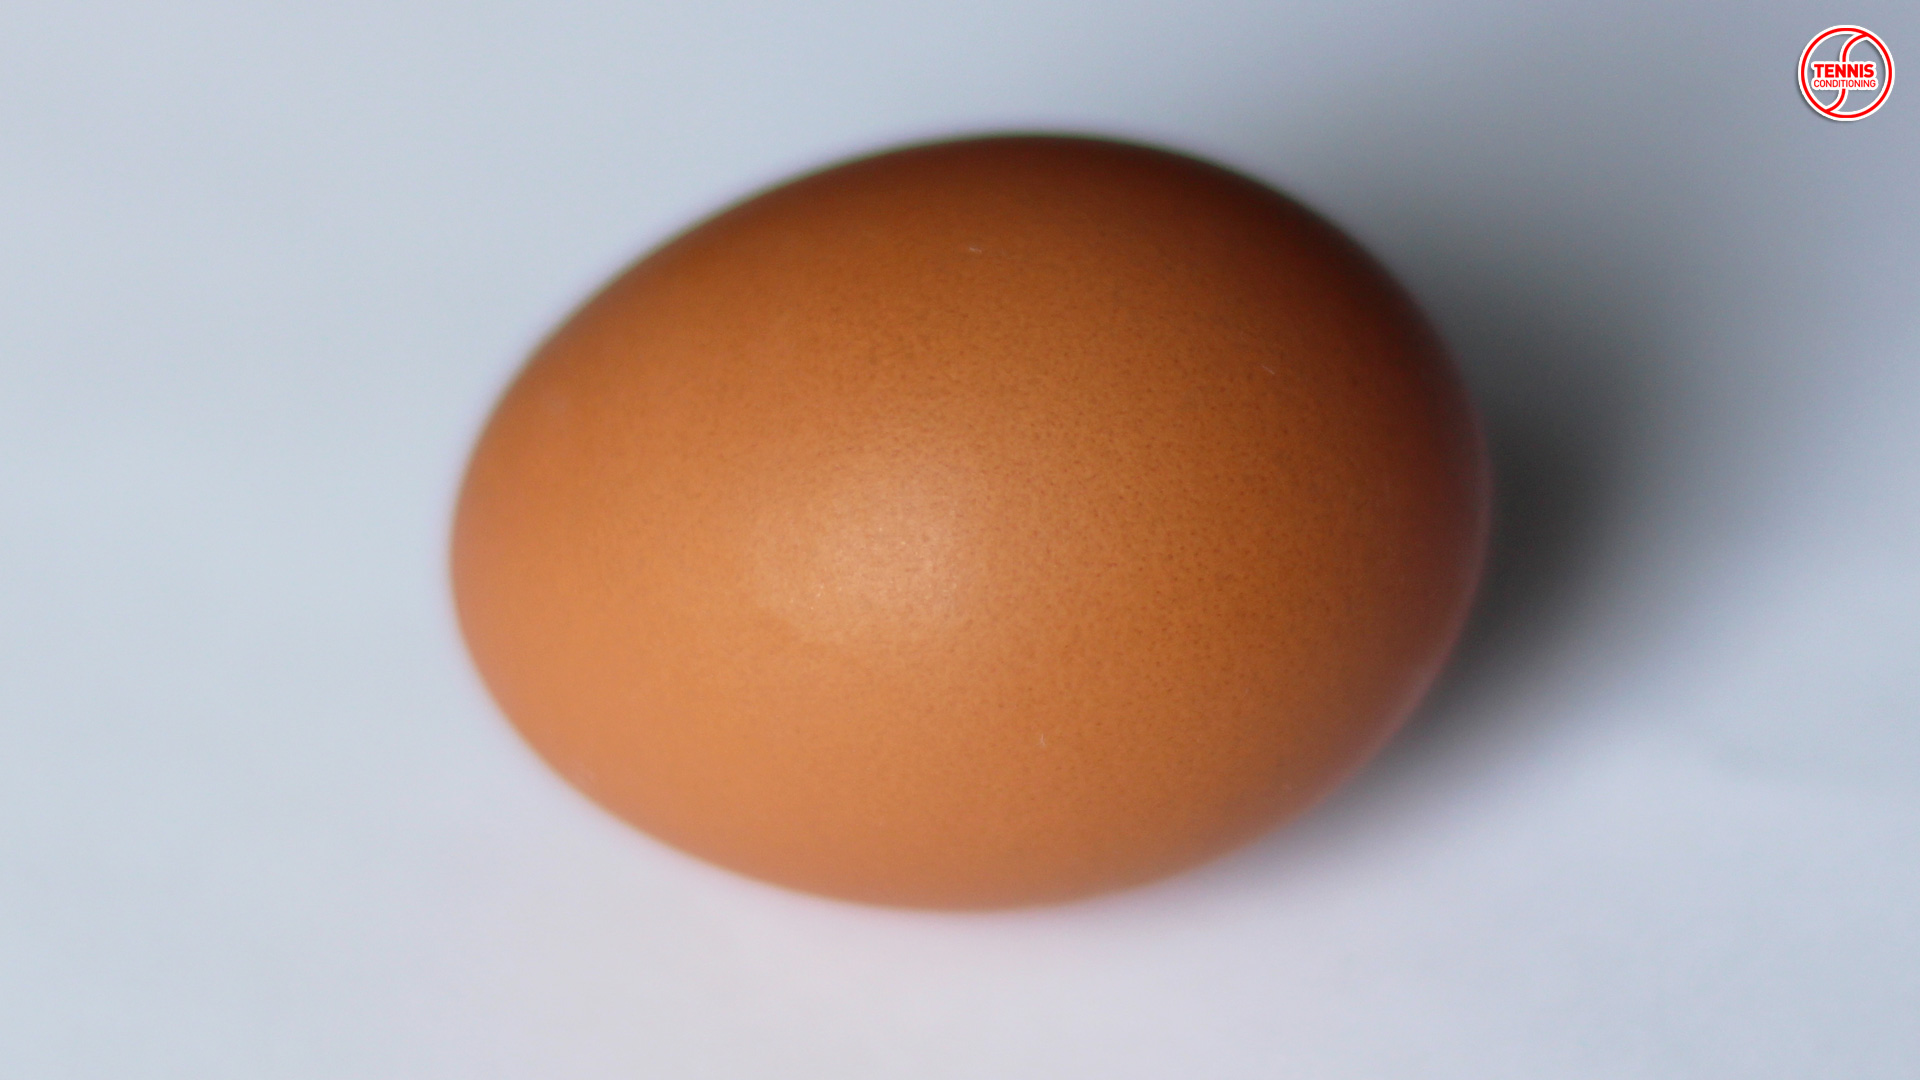 source of protein - egg